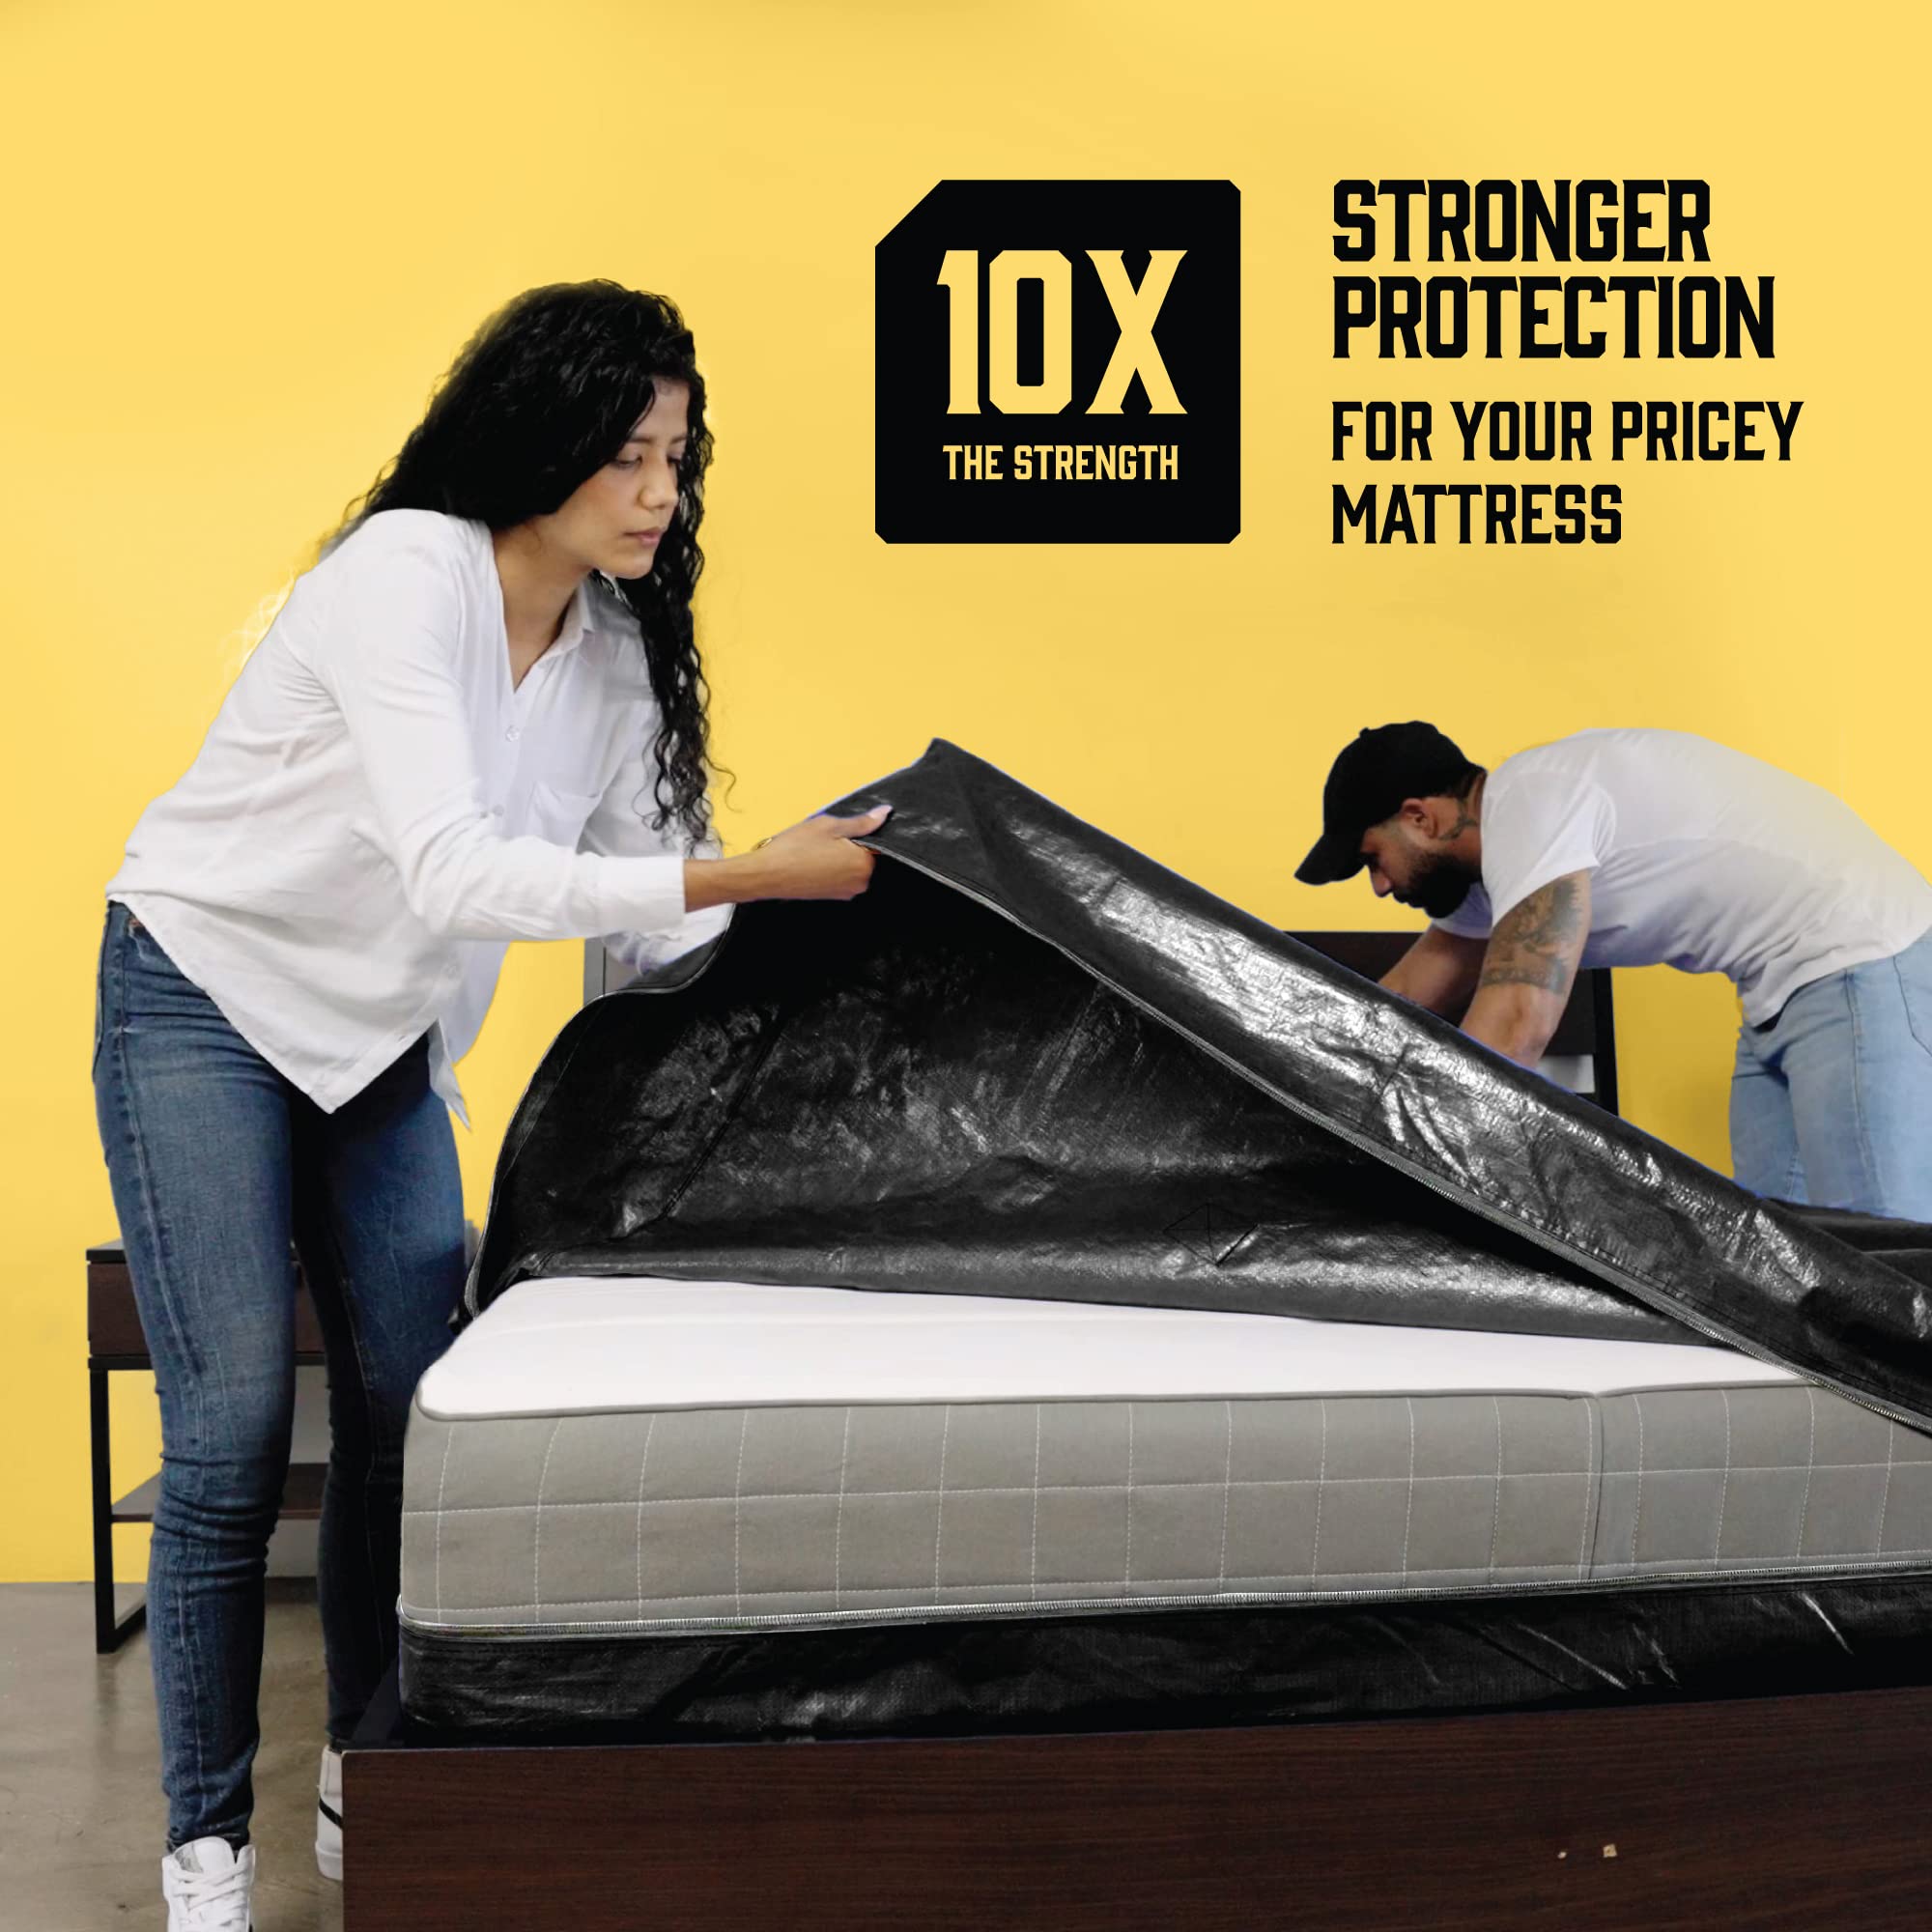 Mattress Bags for Moving with 8 Handles - Extra-Thick Mattress Bag for Moving - Reusable Mattress Storage Bag - Mattress Cover for Moving with Zipper, Moving Mattress Bag Protector  - Very Good